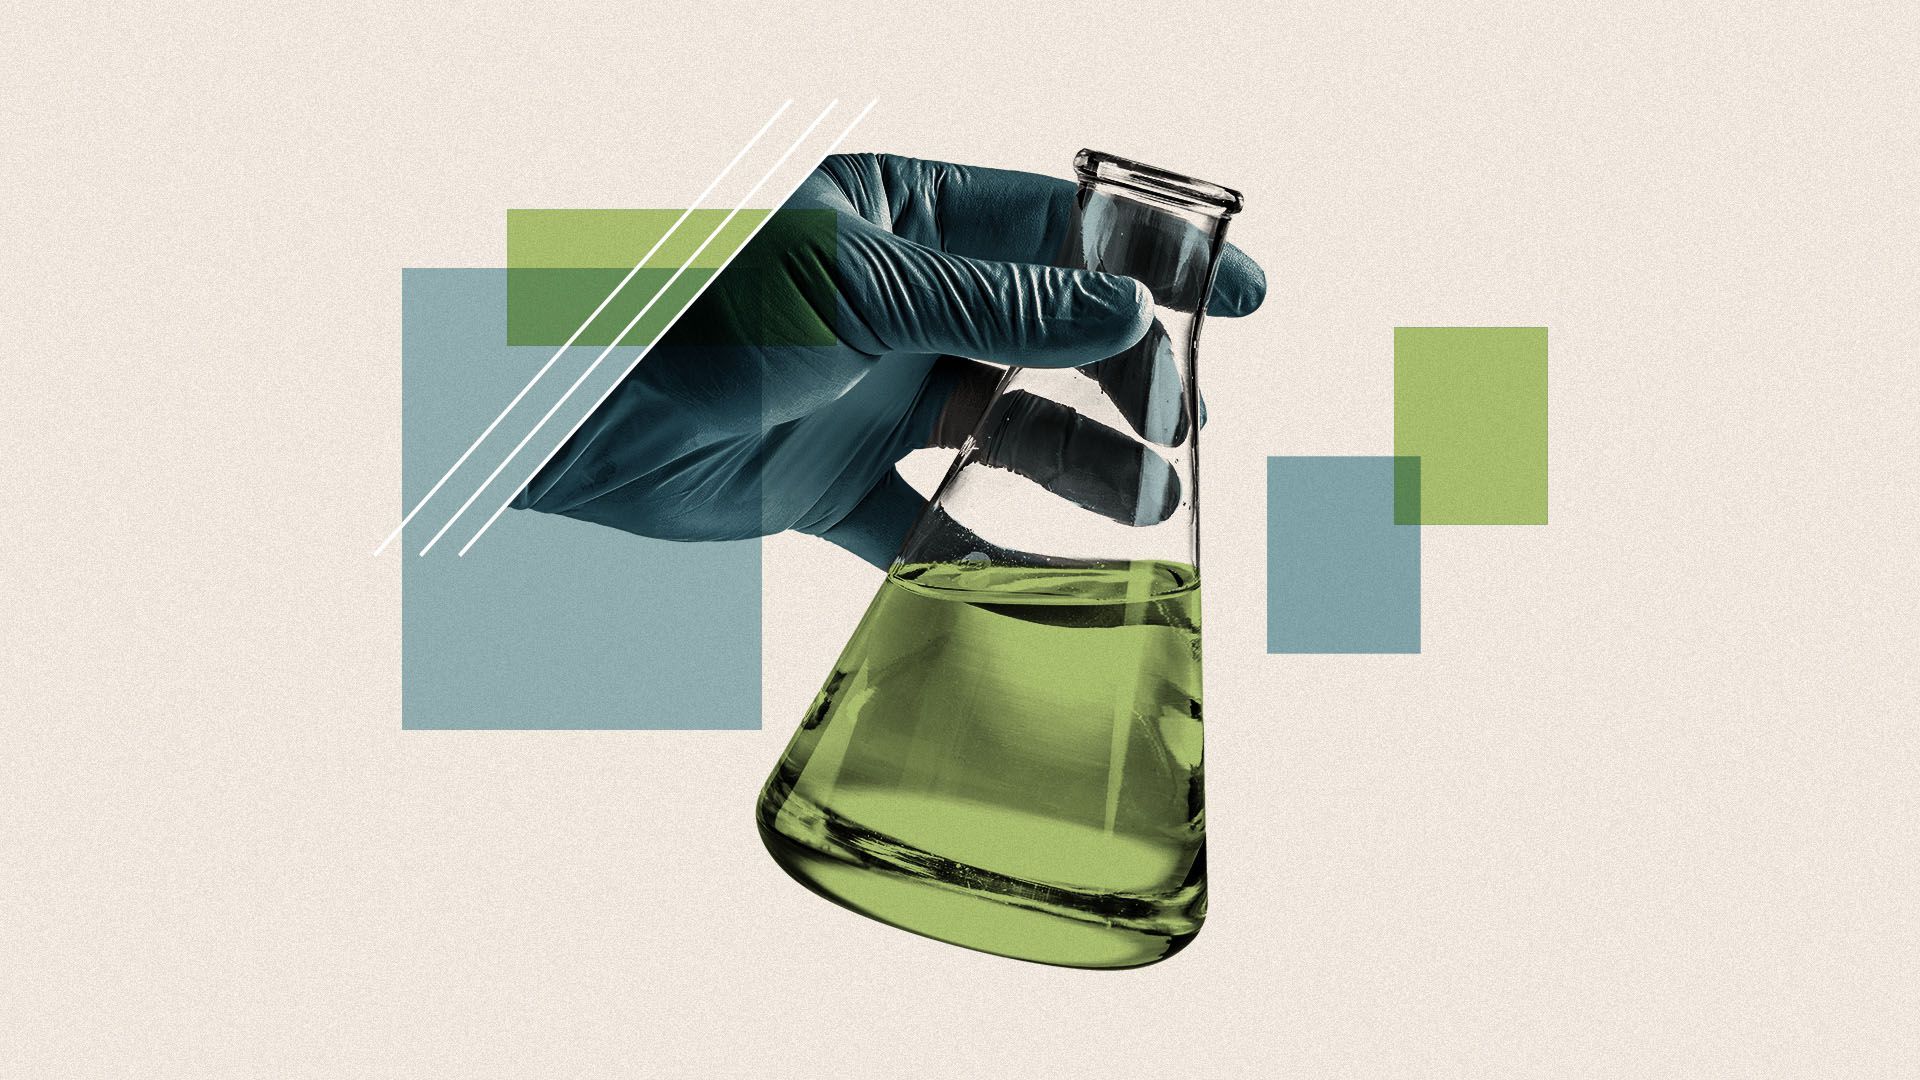 Illustration of a hand in a medical glove holding a beaker full of liquid